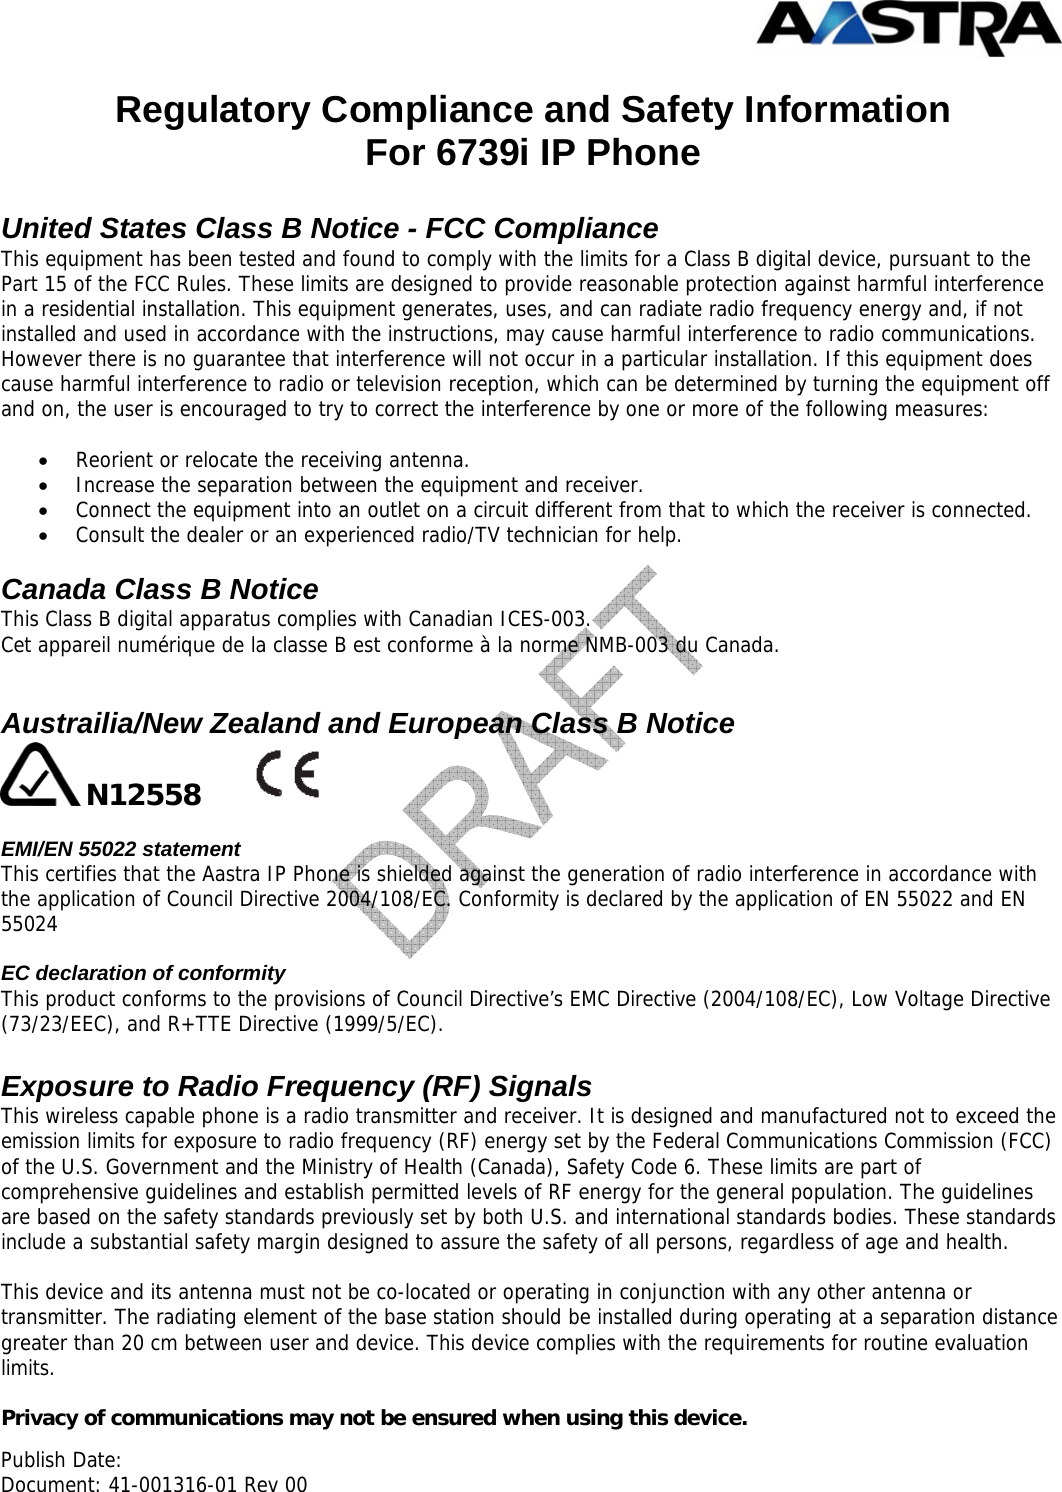  Publish Date:  Document: 41-001316-01 Rev 00 Regulatory Compliance and Safety Information For 6739i IP Phone  United States Class B Notice - FCC Compliance This equipment has been tested and found to comply with the limits for a Class B digital device, pursuant to the Part 15 of the FCC Rules. These limits are designed to provide reasonable protection against harmful interference in a residential installation. This equipment generates, uses, and can radiate radio frequency energy and, if not installed and used in accordance with the instructions, may cause harmful interference to radio communications. However there is no guarantee that interference will not occur in a particular installation. If this equipment does cause harmful interference to radio or television reception, which can be determined by turning the equipment off and on, the user is encouraged to try to correct the interference by one or more of the following measures:  • Reorient or relocate the receiving antenna.  • Increase the separation between the equipment and receiver.  • Connect the equipment into an outlet on a circuit different from that to which the receiver is connected.  • Consult the dealer or an experienced radio/TV technician for help.   Canada Class B Notice This Class B digital apparatus complies with Canadian ICES-003.  Cet appareil numérique de la classe B est conforme à la norme NMB-003 du Canada.   Austrailia/New Zealand and European Class B Notice  N12558            EMI/EN 55022 statement This certifies that the Aastra IP Phone is shielded against the generation of radio interference in accordance with the application of Council Directive 2004/108/EC. Conformity is declared by the application of EN 55022 and EN 55024  EC declaration of conformity This product conforms to the provisions of Council Directive’s EMC Directive (2004/108/EC), Low Voltage Directive (73/23/EEC), and R+TTE Directive (1999/5/EC).  Exposure to Radio Frequency (RF) Signals This wireless capable phone is a radio transmitter and receiver. It is designed and manufactured not to exceed the emission limits for exposure to radio frequency (RF) energy set by the Federal Communications Commission (FCC) of the U.S. Government and the Ministry of Health (Canada), Safety Code 6. These limits are part of comprehensive guidelines and establish permitted levels of RF energy for the general population. The guidelines are based on the safety standards previously set by both U.S. and international standards bodies. These standards include a substantial safety margin designed to assure the safety of all persons, regardless of age and health.  This device and its antenna must not be co-located or operating in conjunction with any other antenna or transmitter. The radiating element of the base station should be installed during operating at a separation distance greater than 20 cm between user and device. This device complies with the requirements for routine evaluation limits.  Privacy of communications may not be ensured when using this device. 